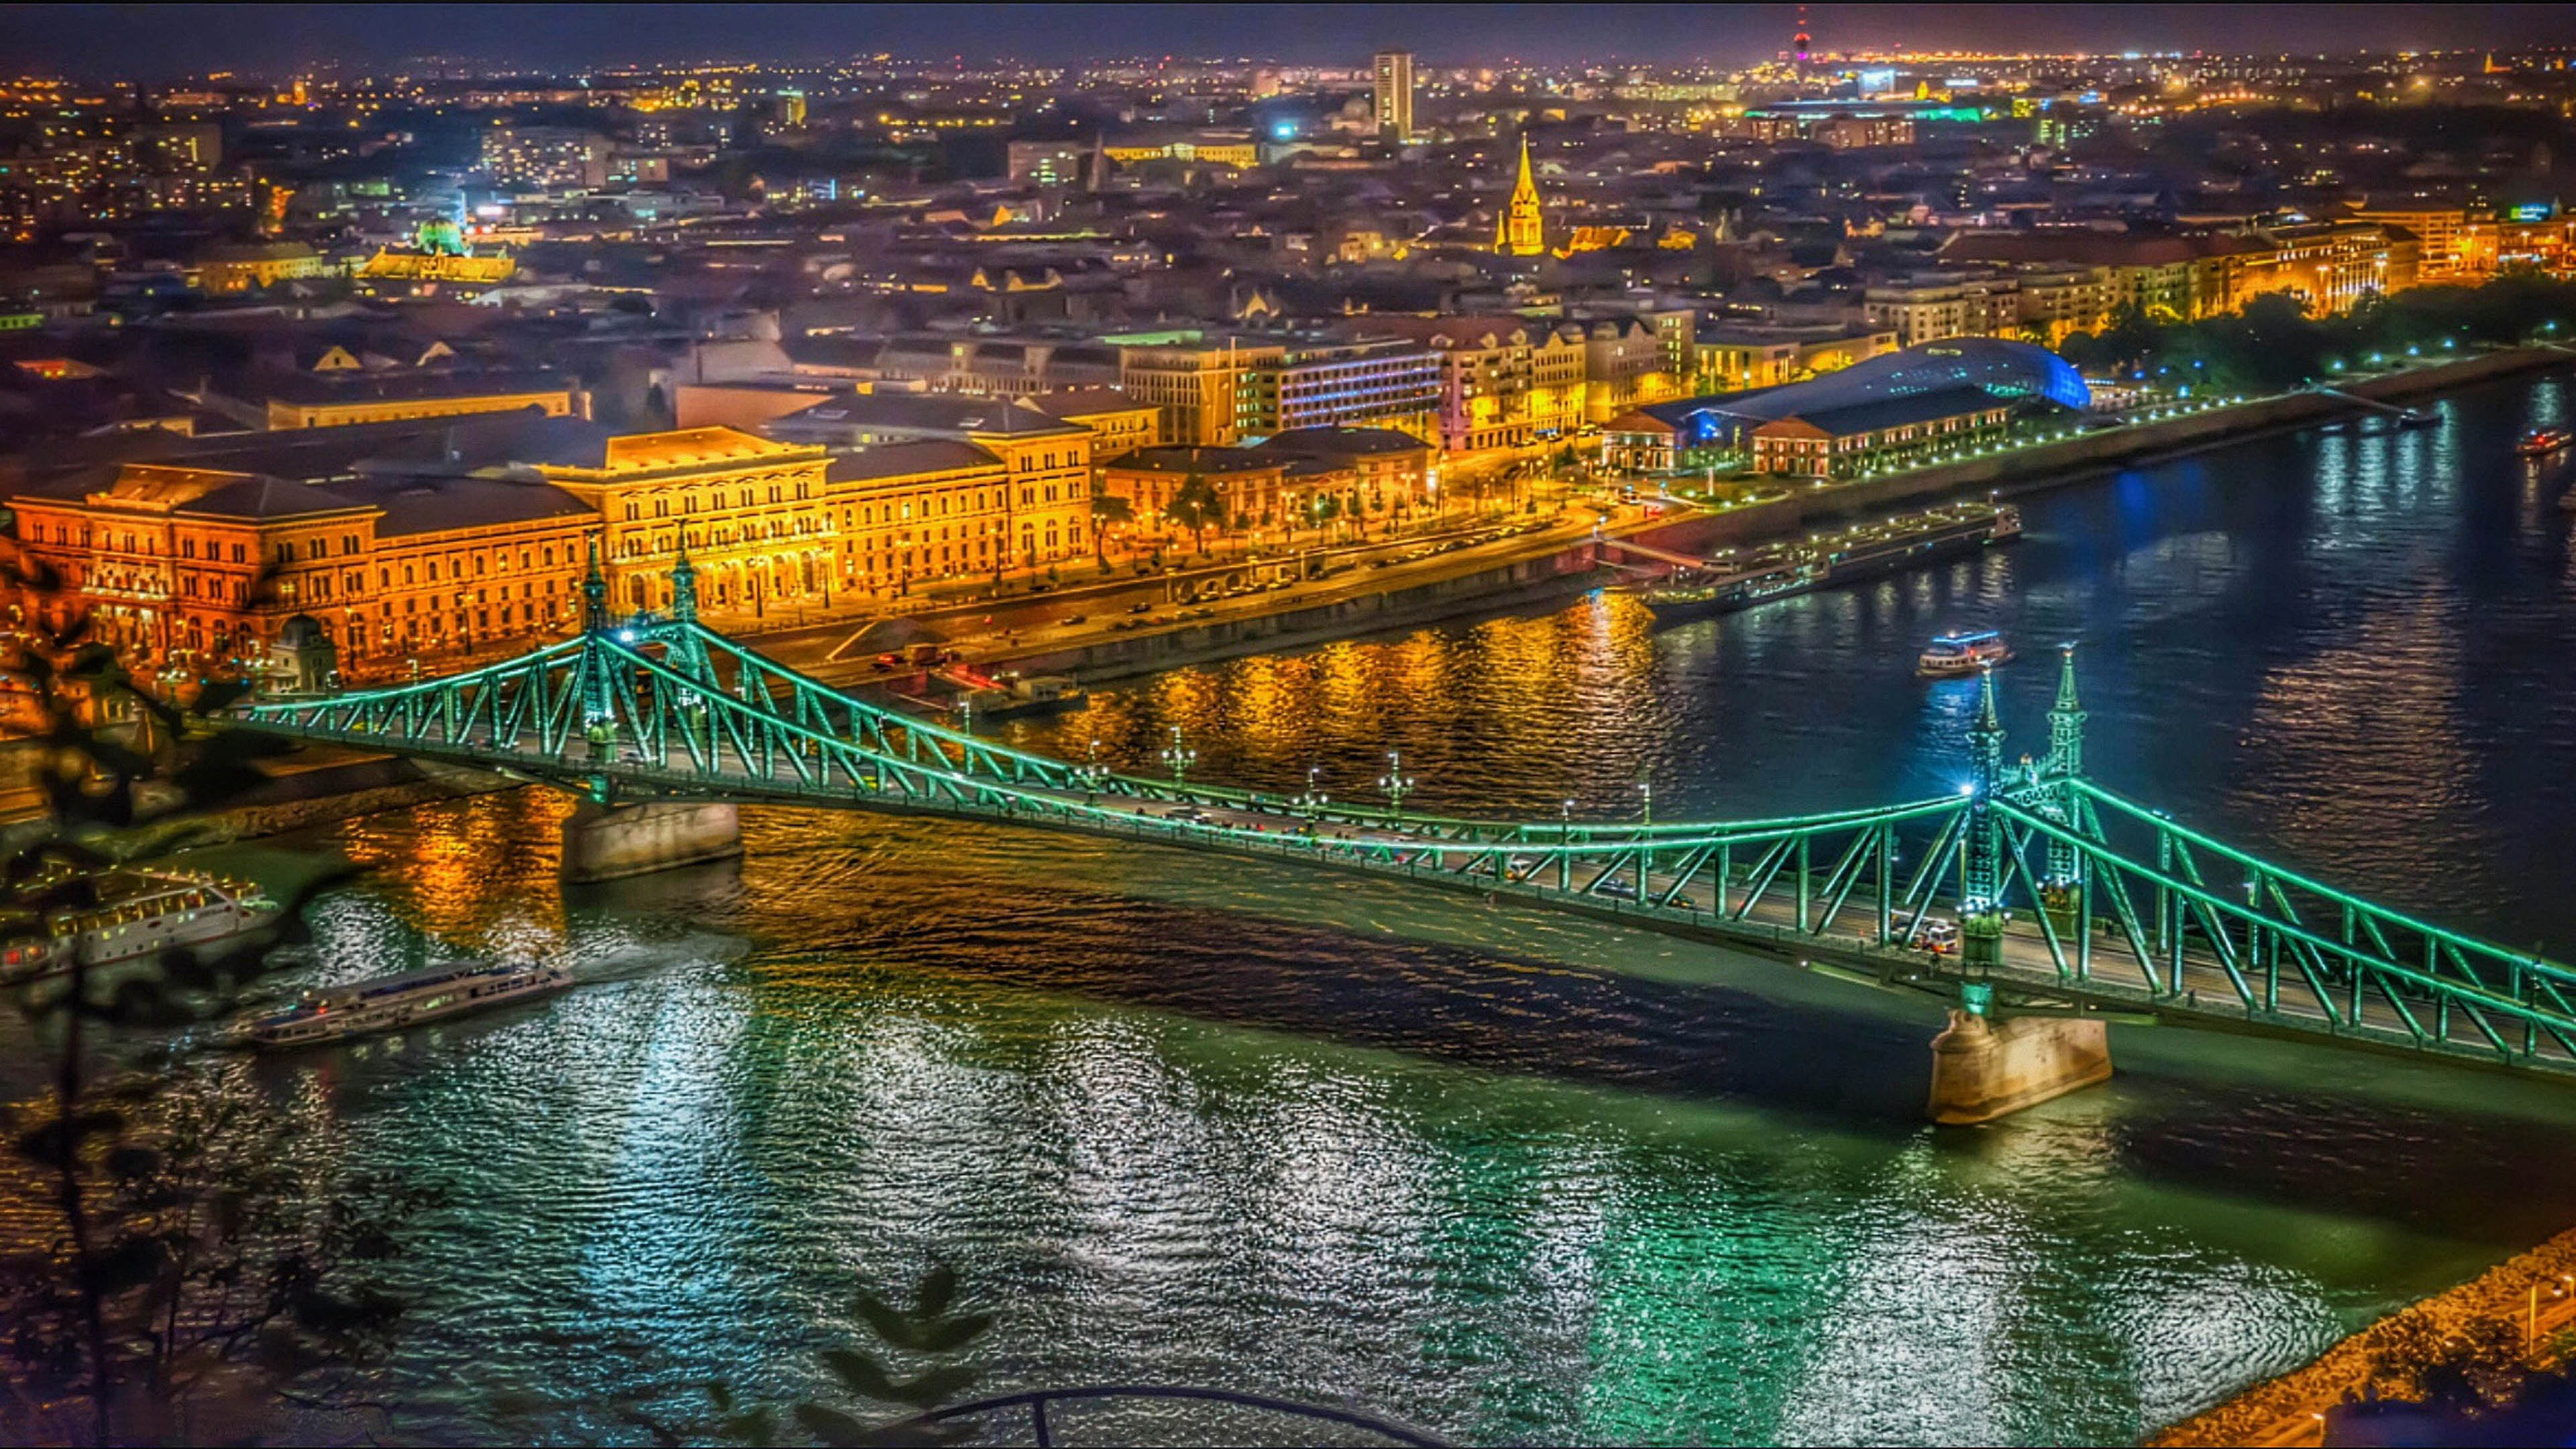 Budapest: The ninth-largest city in the European Union, Danube River, Castle Hill. 3840x2160 4K Wallpaper.